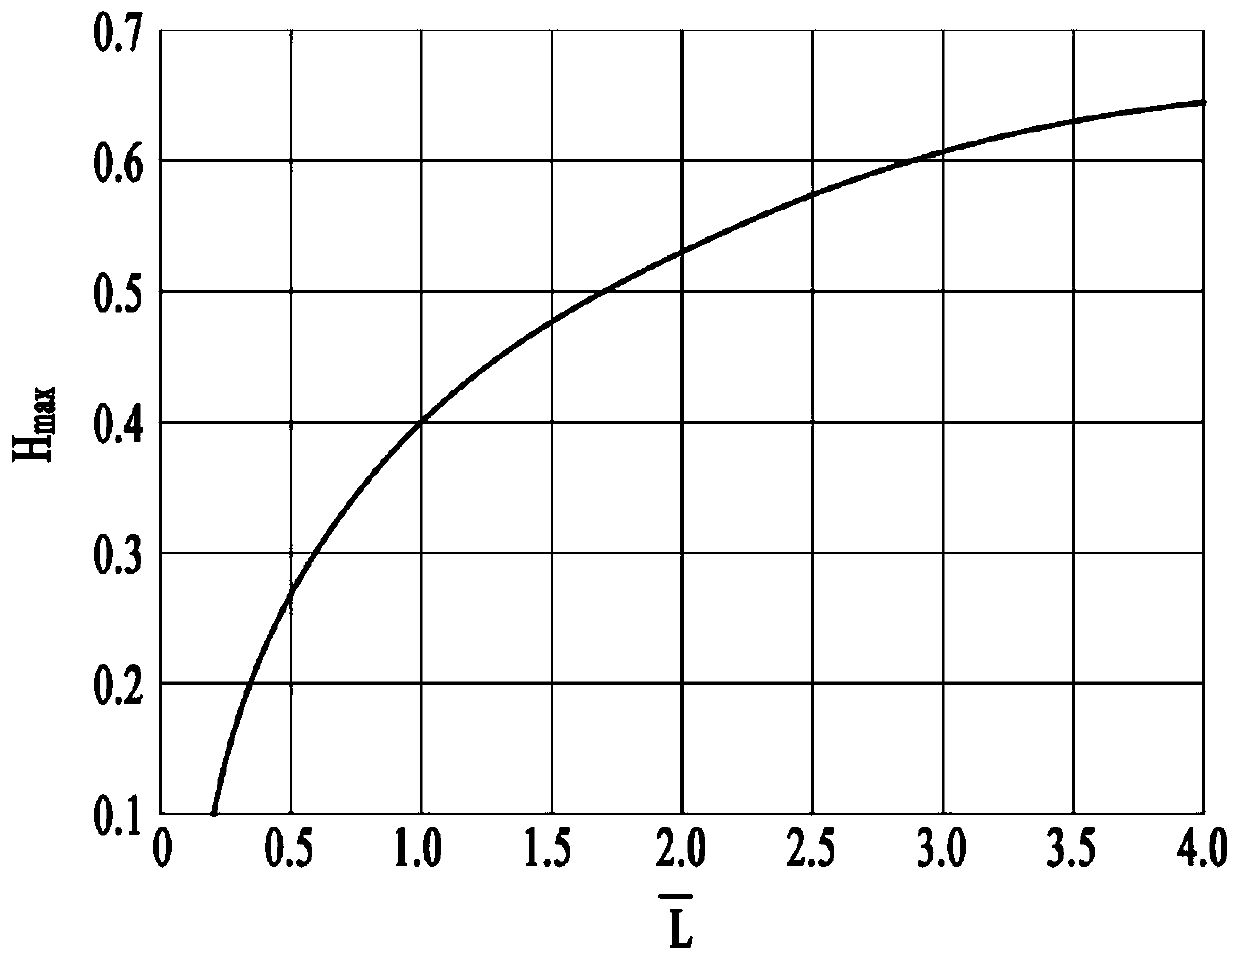 A compressor stability boundary judgment method considering the influence of intake total pressure distortion